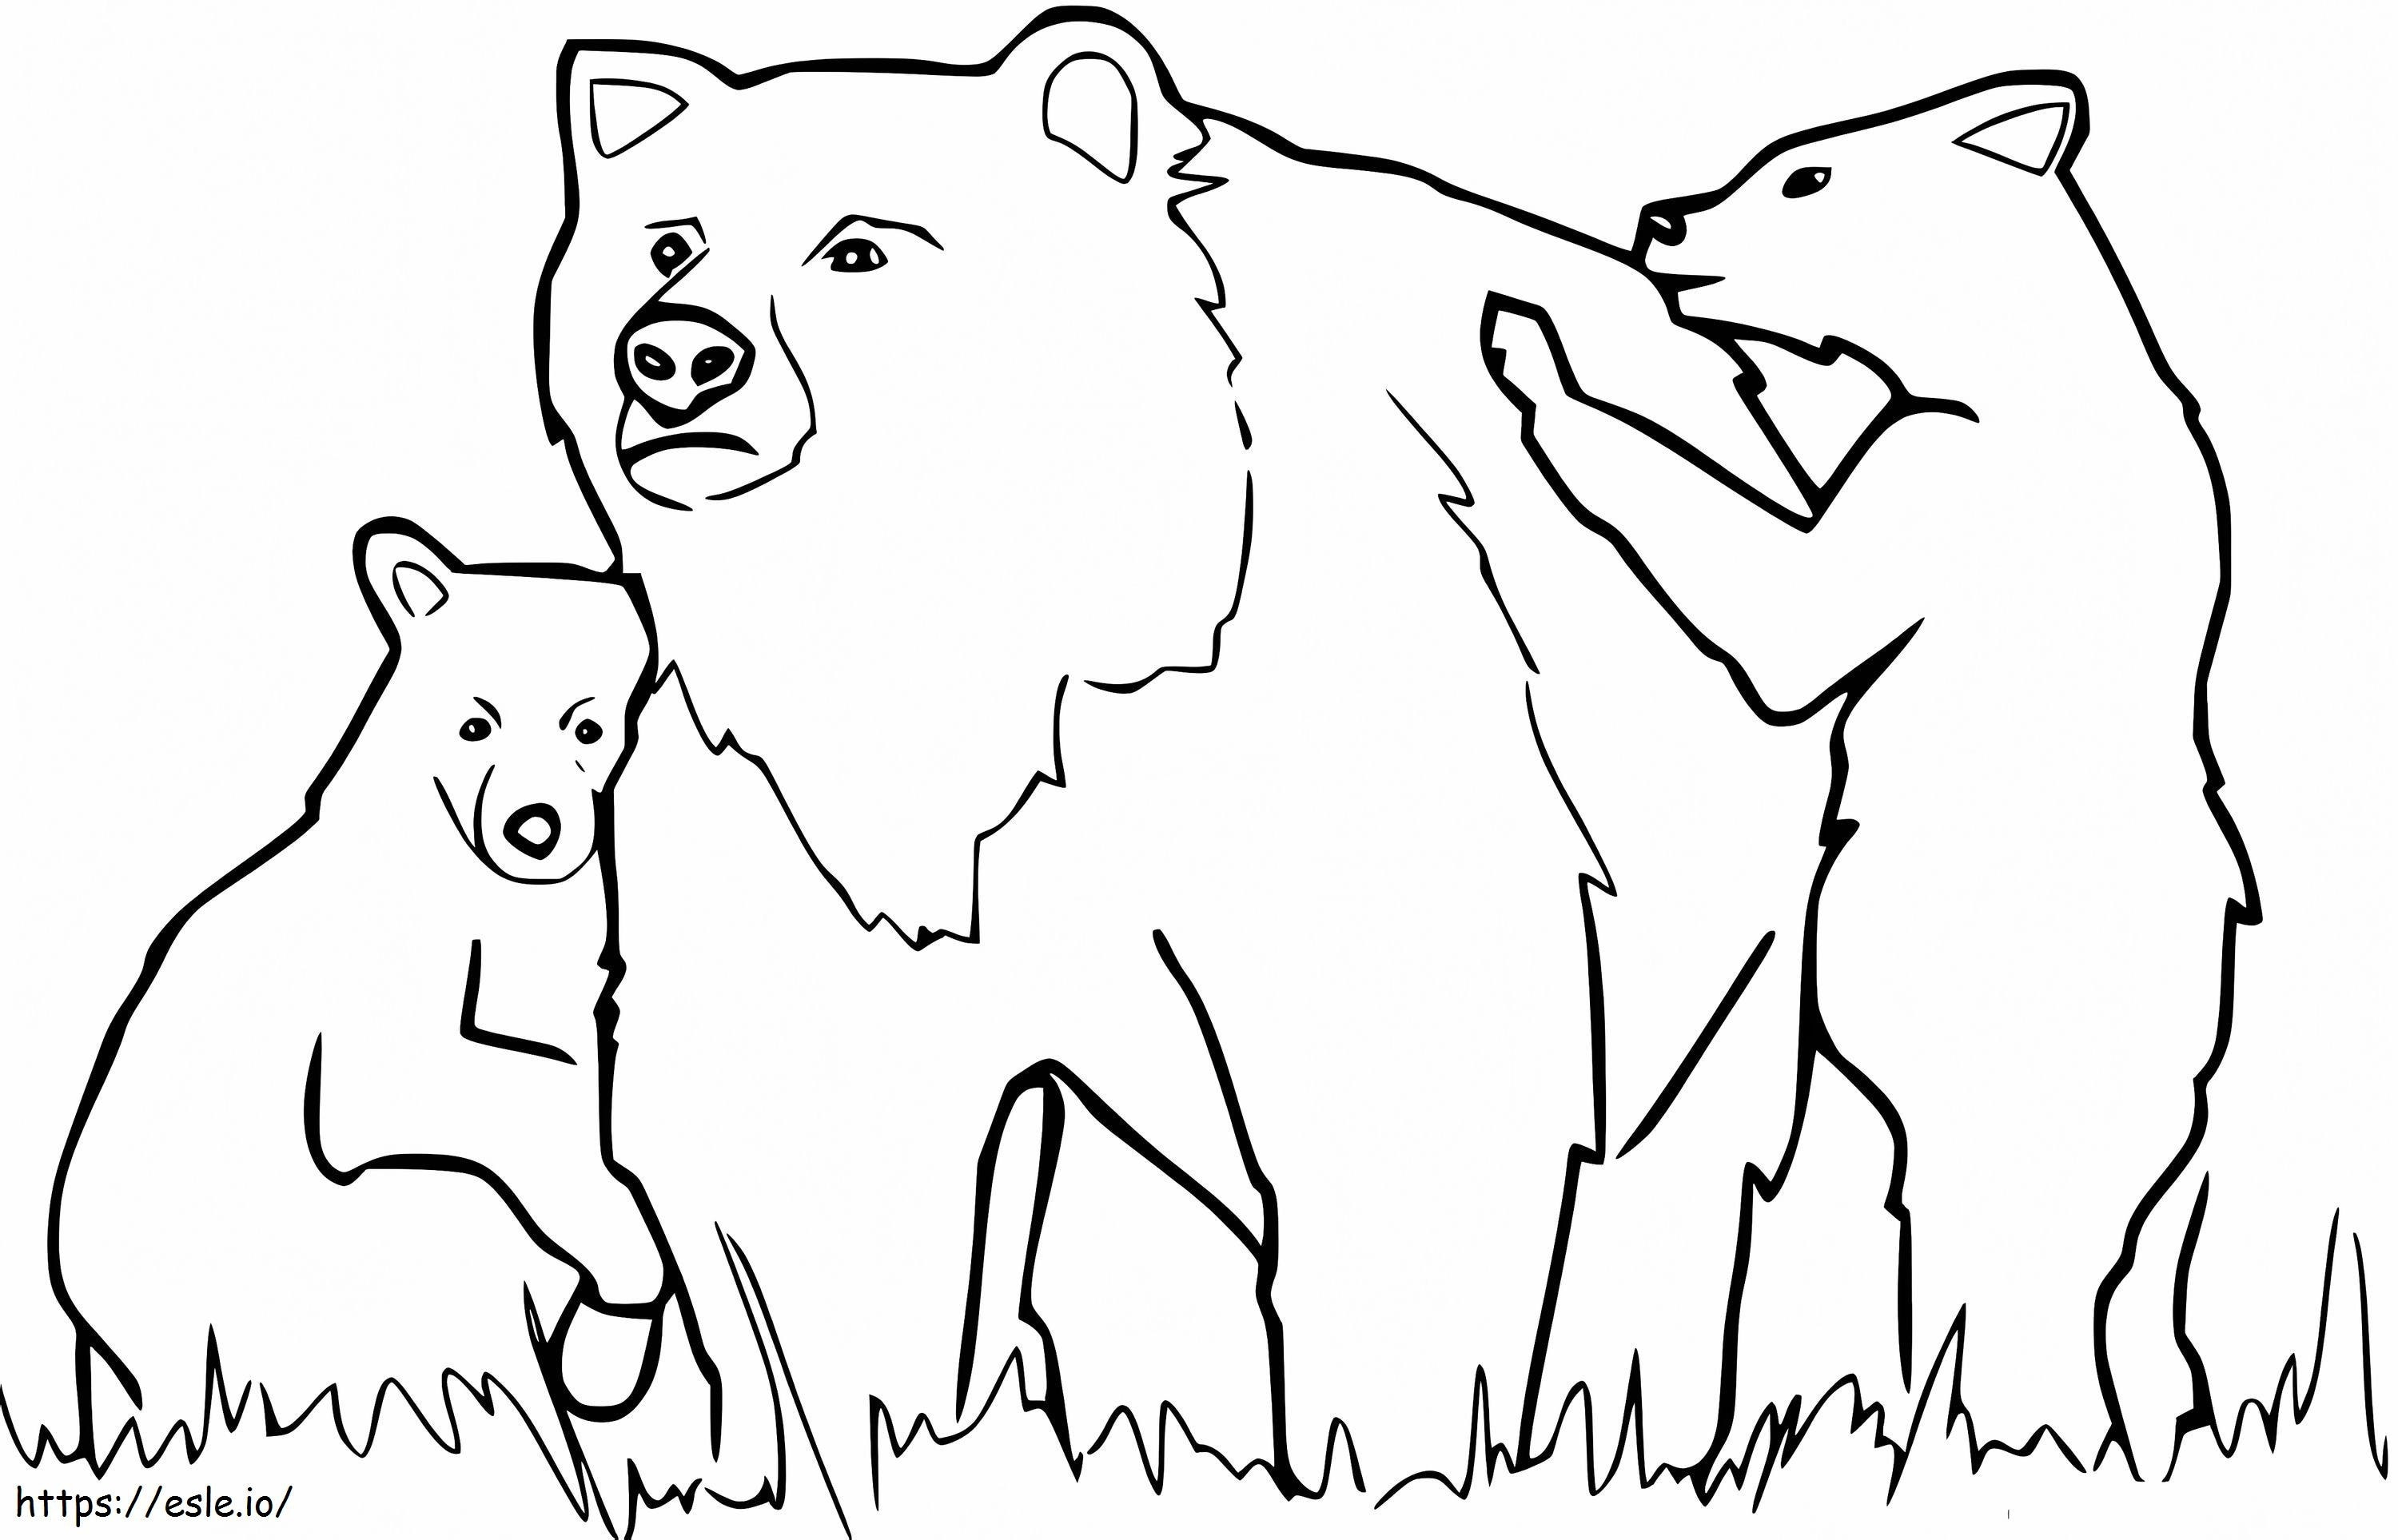 Family Black Bears coloring page